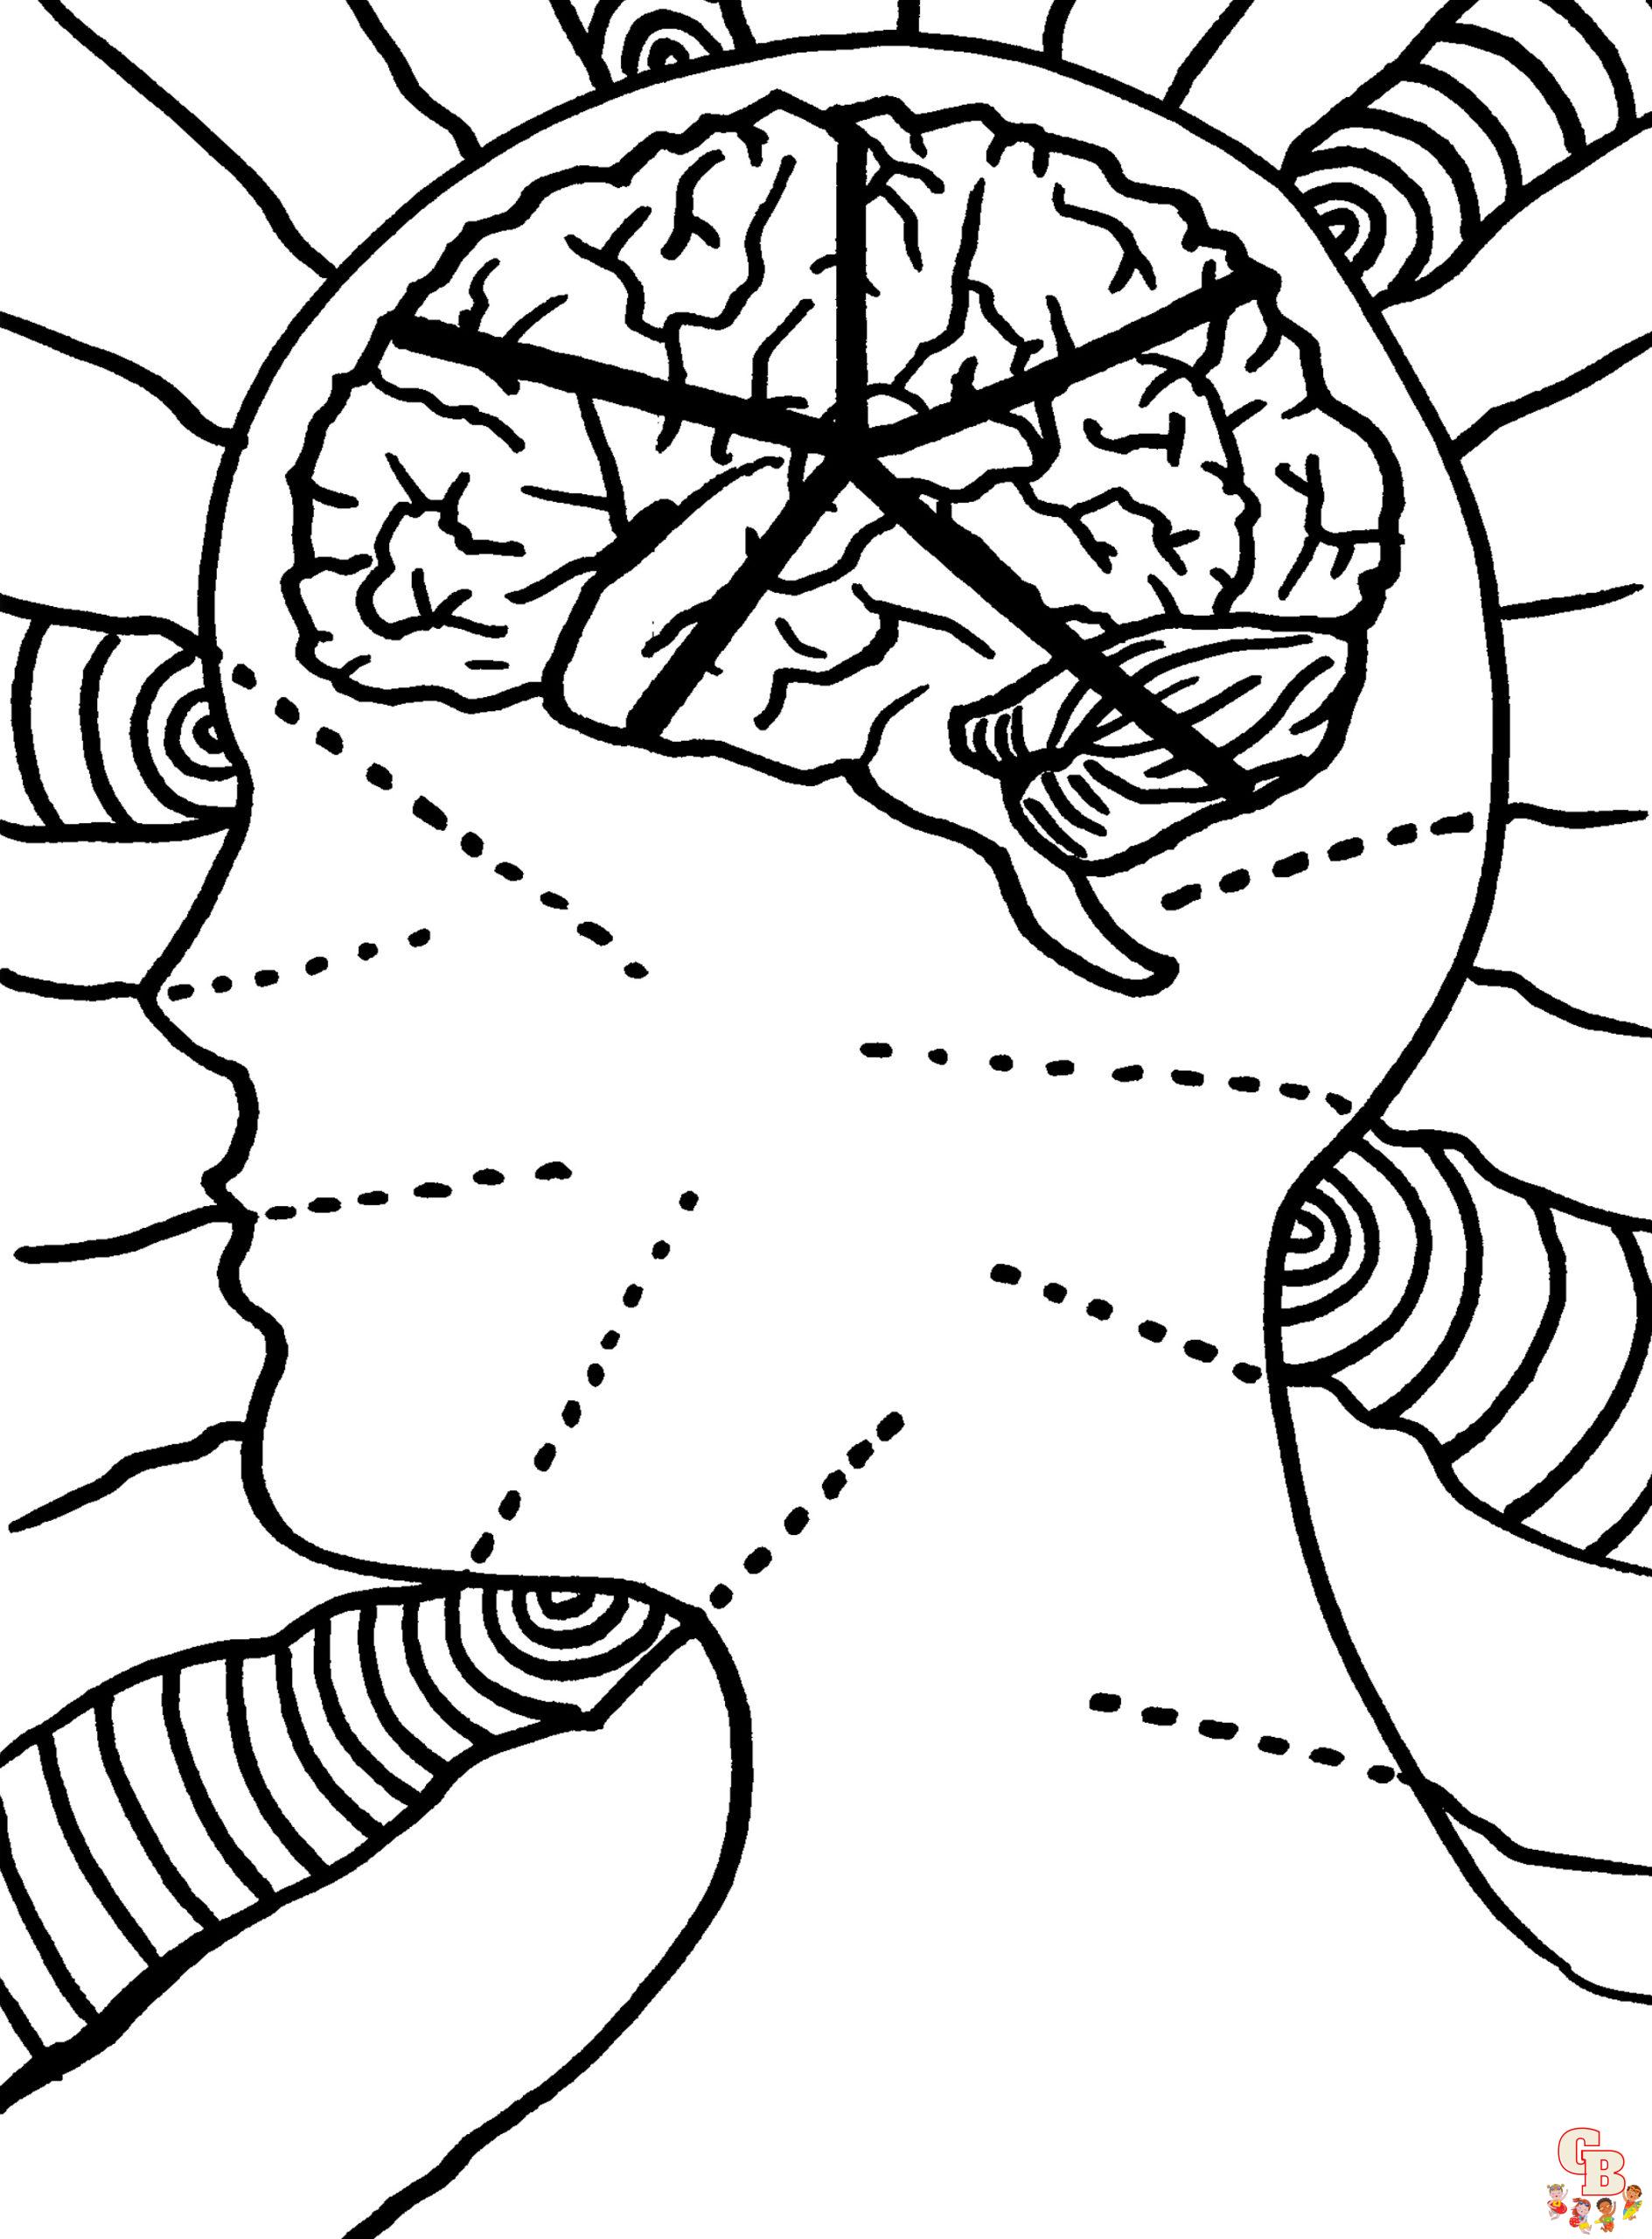 Therapy coloring pages free